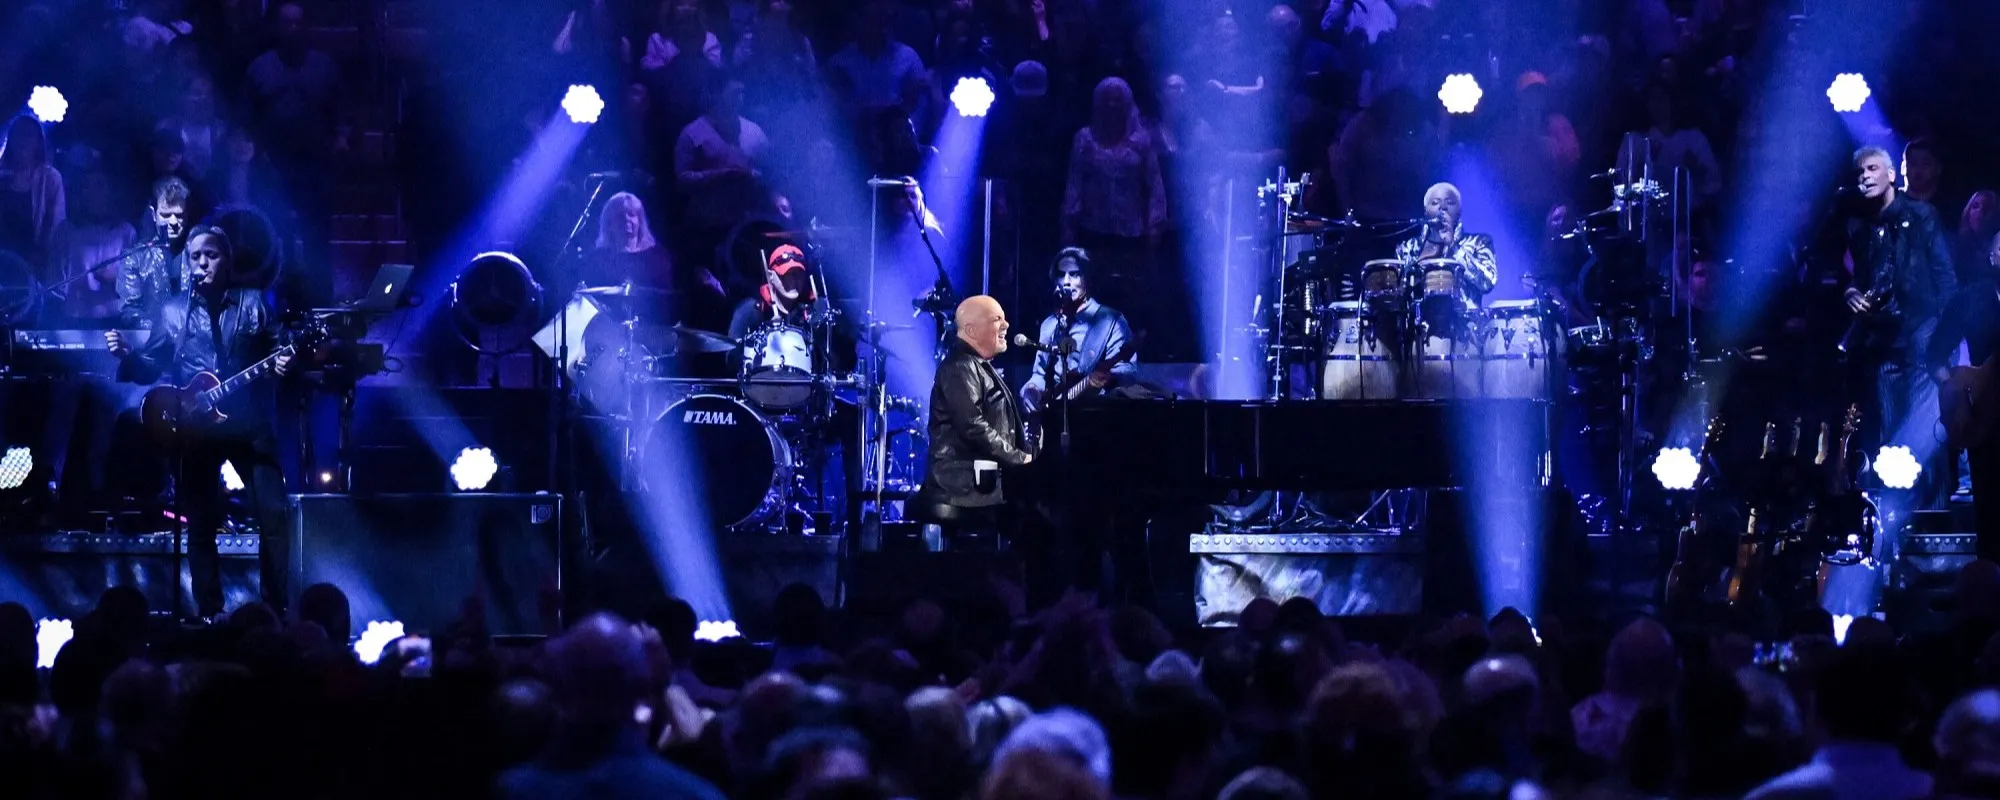 Turn the Show Back On: Billy Joel Fans Livid Over CBS Concert Special ‘The 100th’ Being Cut Short